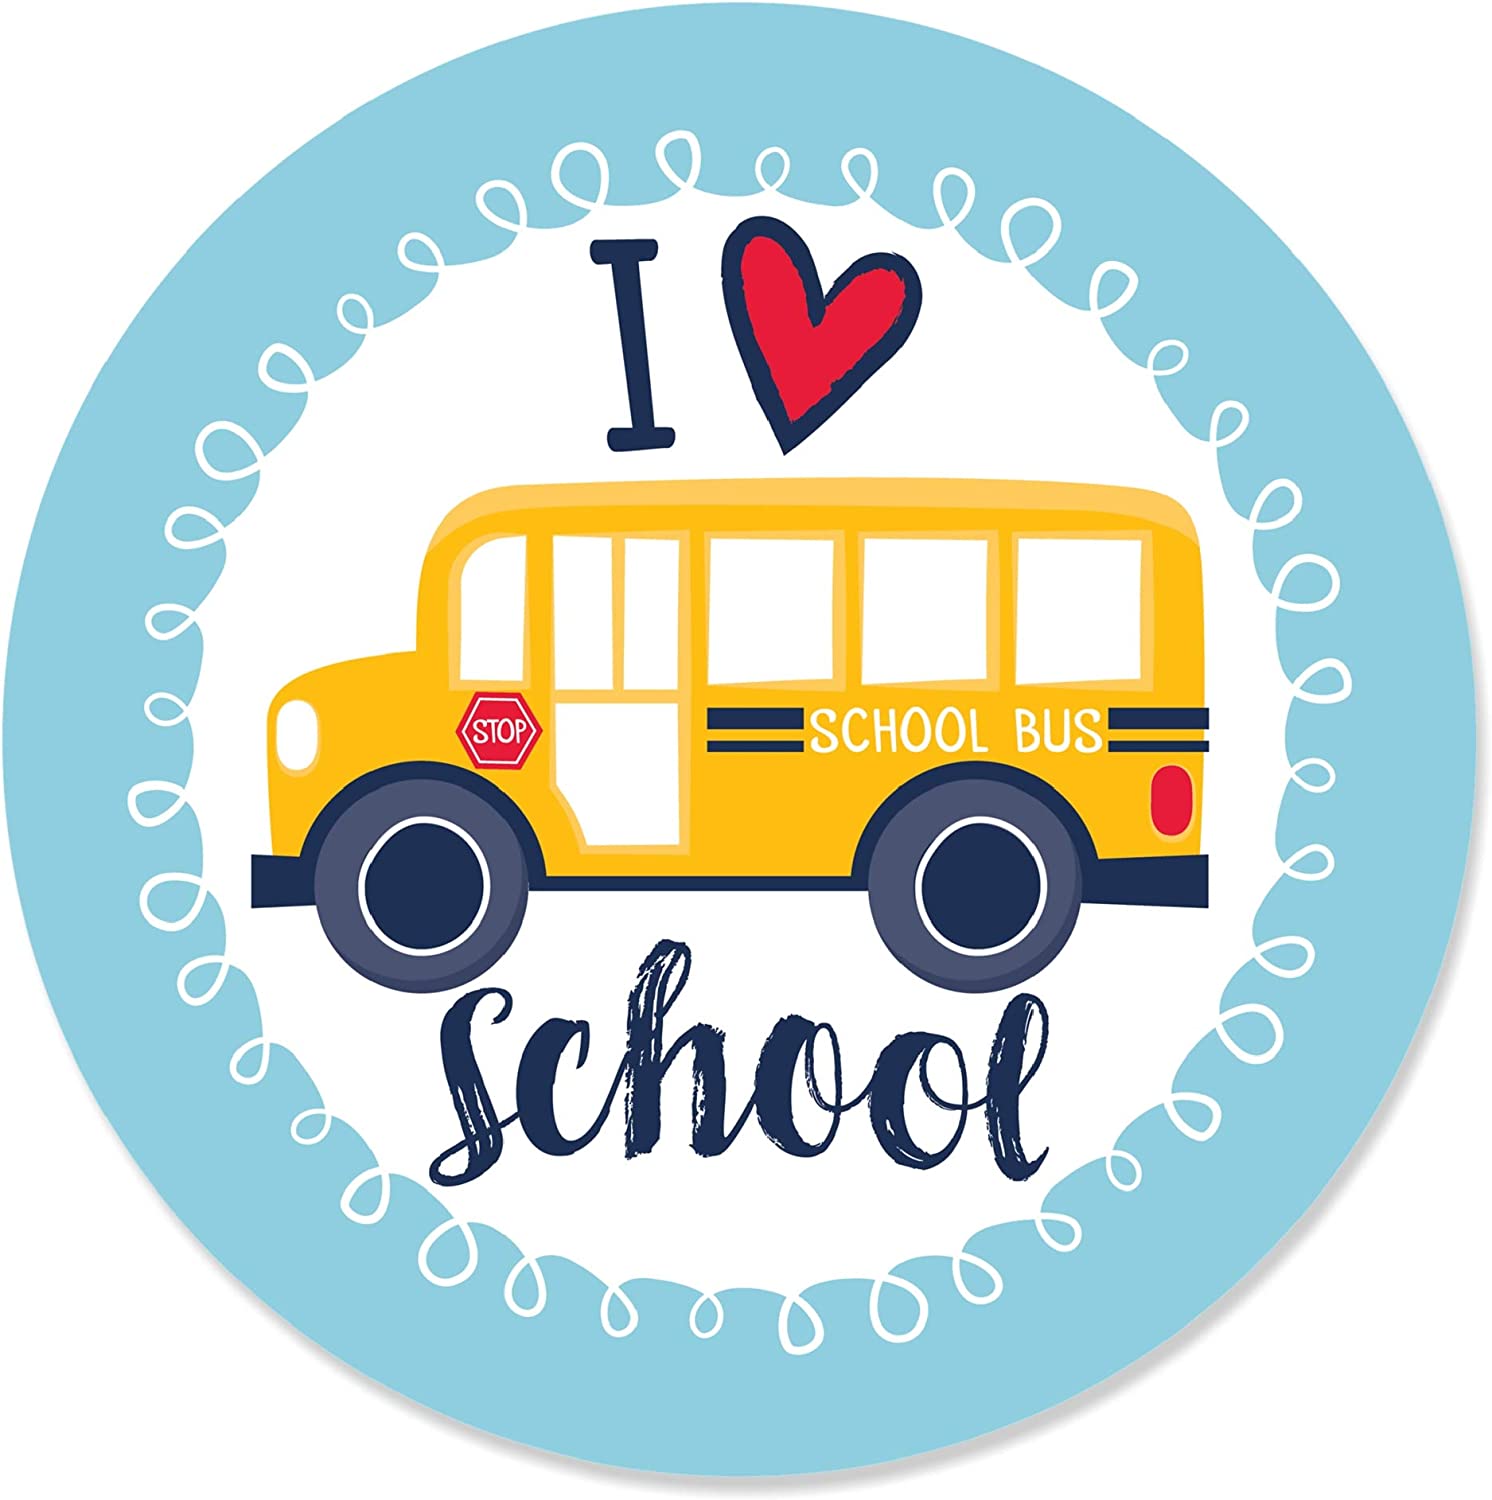 Circular sticker to decorate the classroom in the shape of a school bus